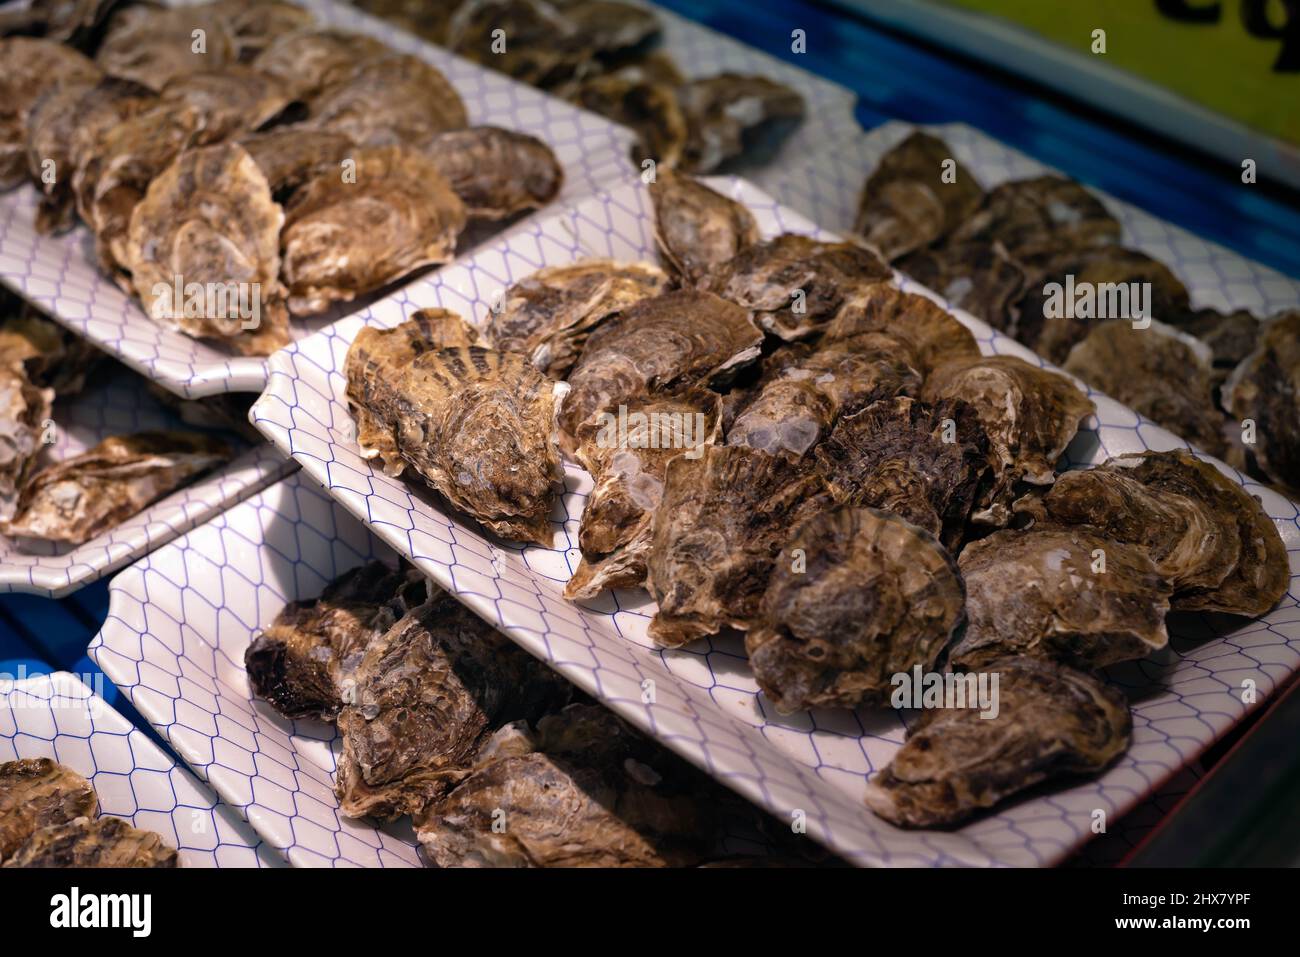 Fresh oysters for sale in containers at an Asian wet market and supermarket. Stock Photo